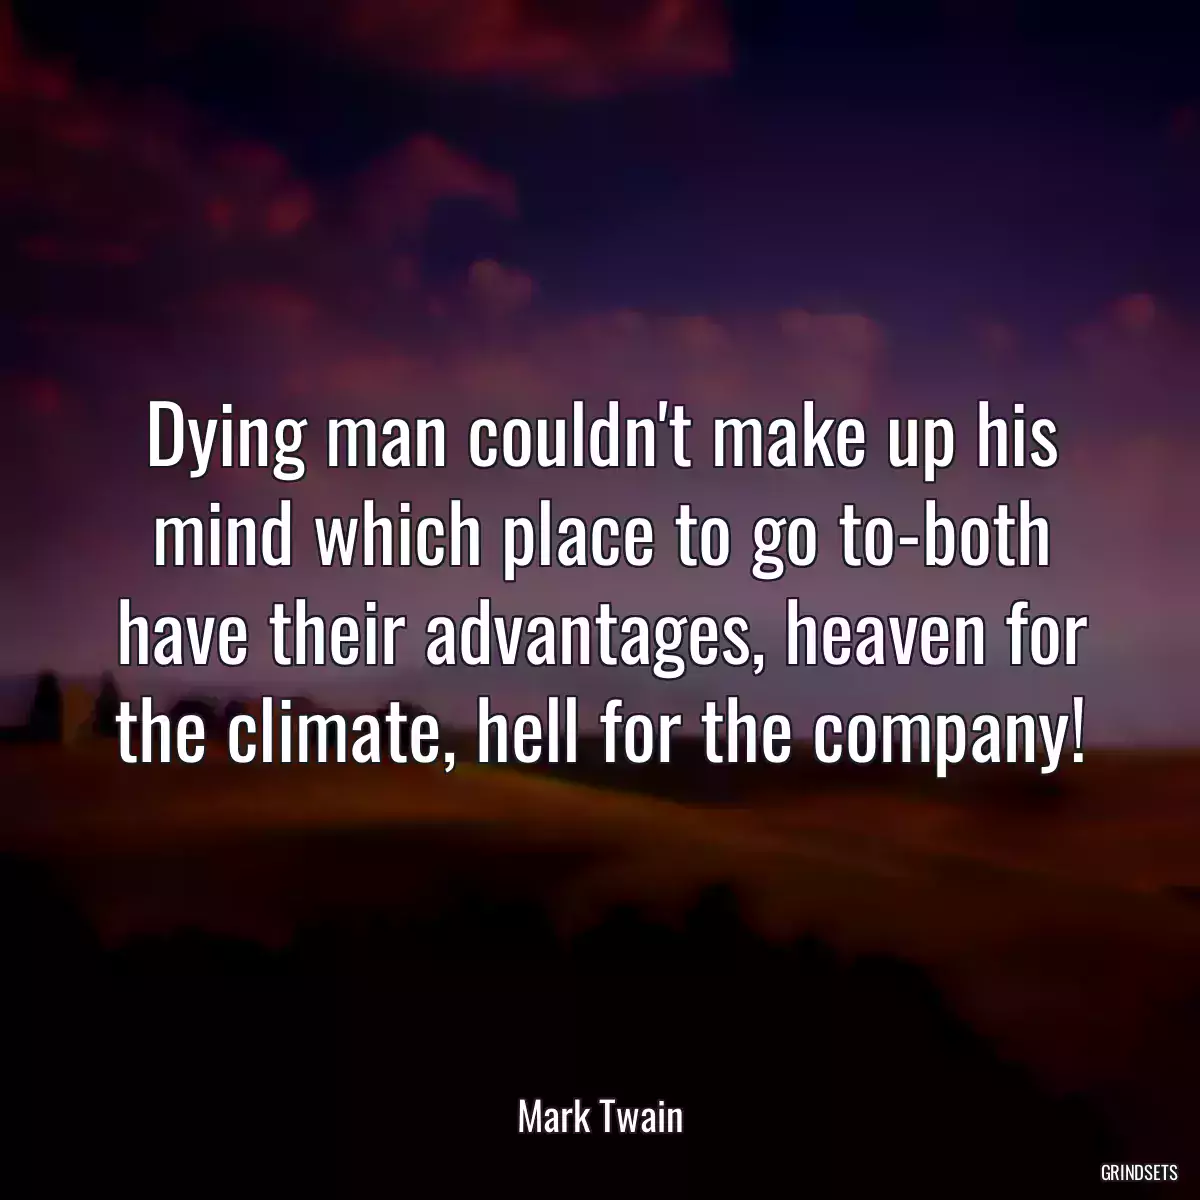 Dying man couldn\'t make up his mind which place to go to-both have their advantages, heaven for the climate, hell for the company!